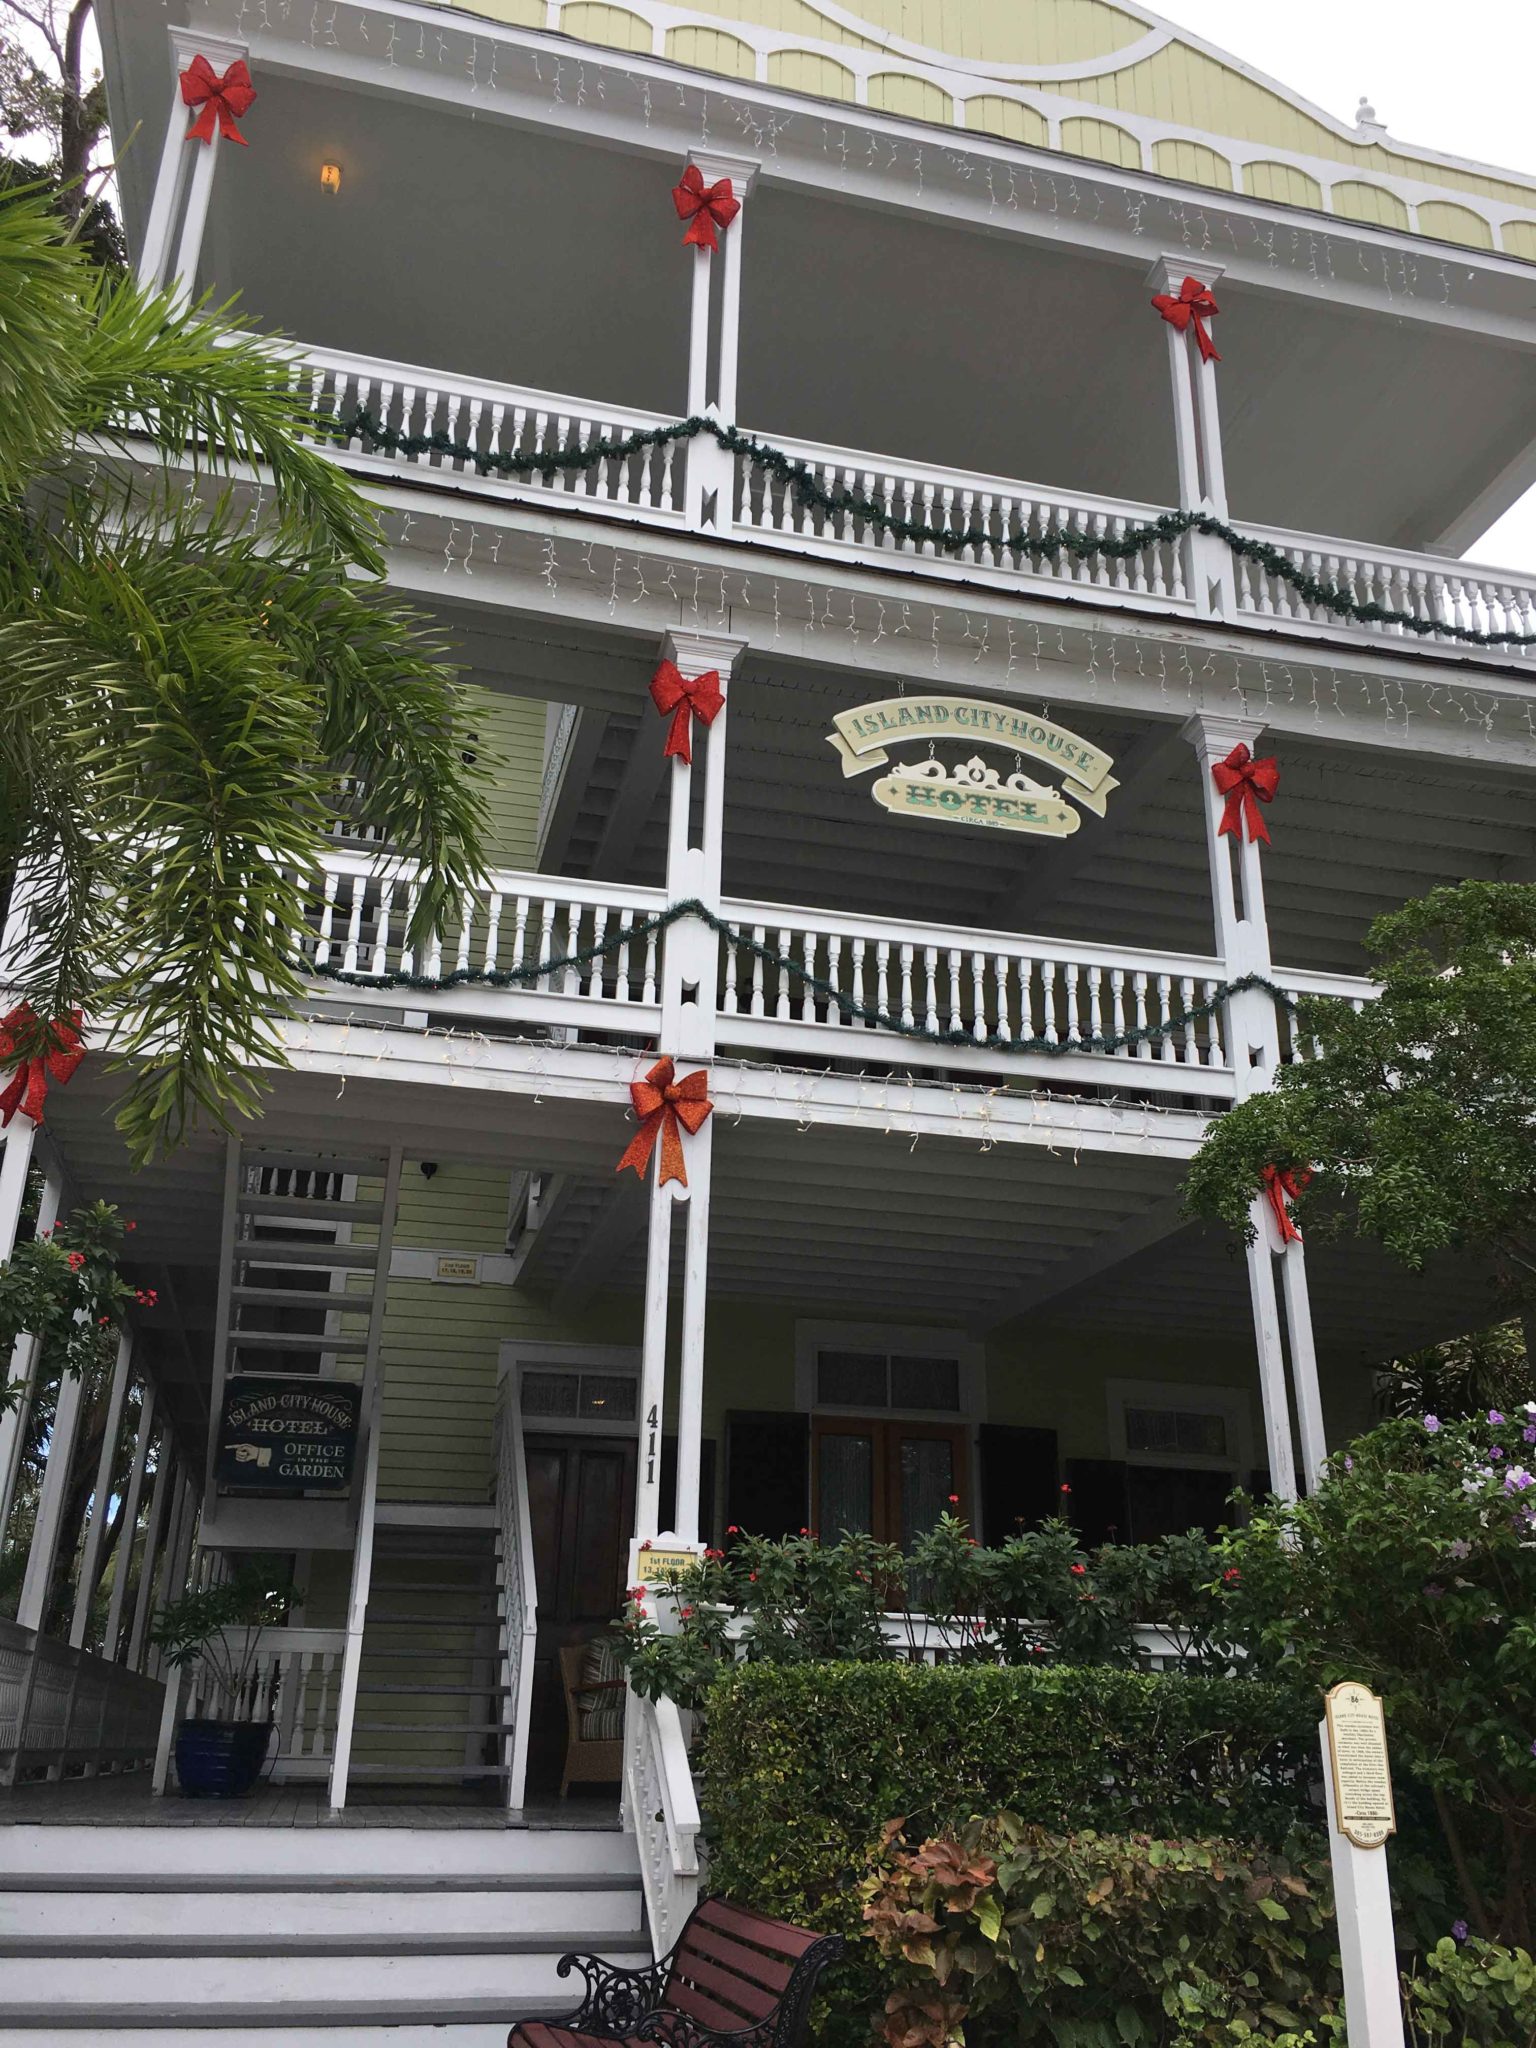 Island City House the Oldest Guesthouse in Key West